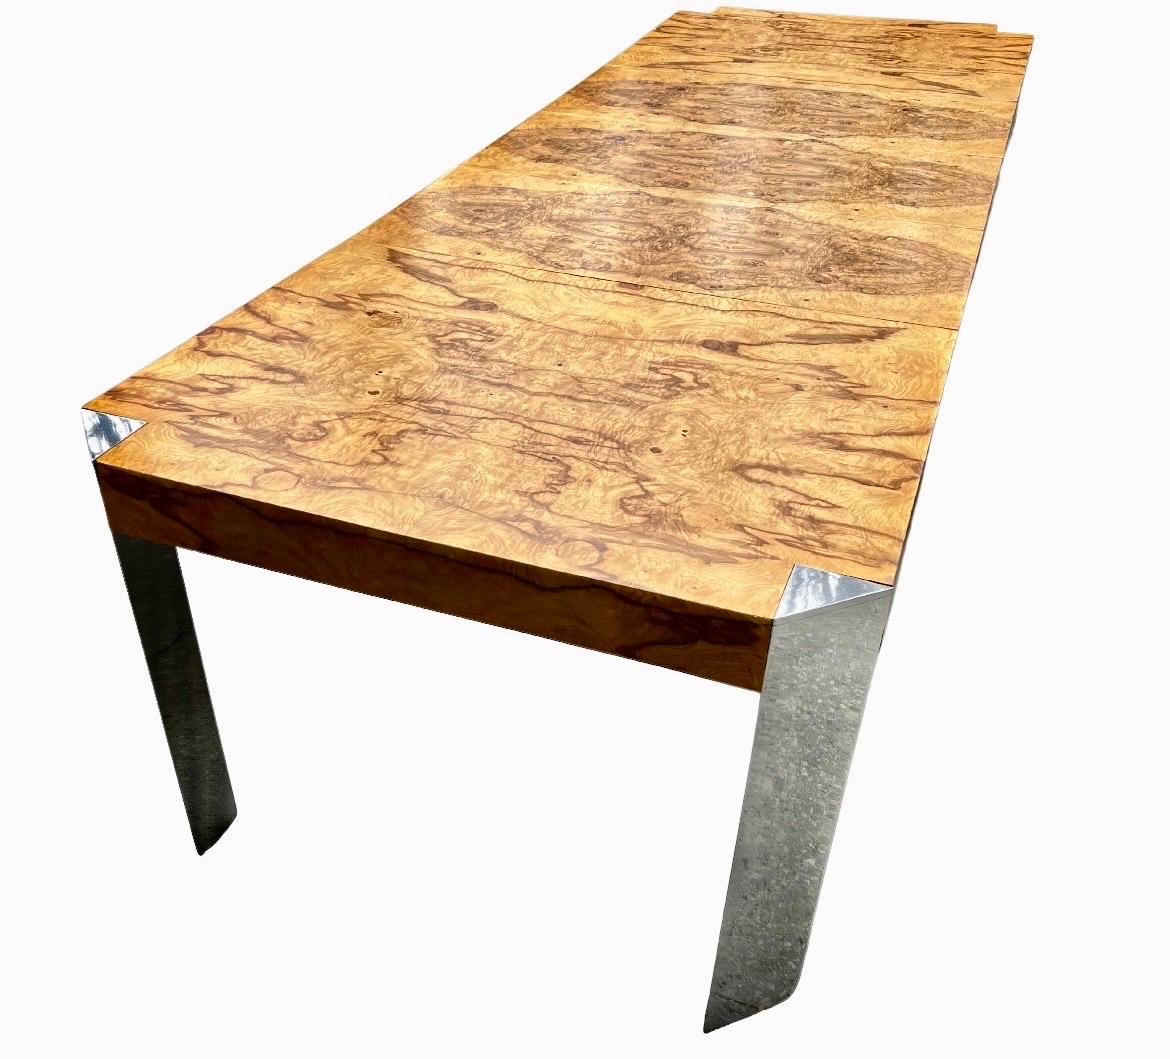 Spectacular Olivewood Butterfly Patterned Dining Table by Sprunger for Dunbar For Sale 11